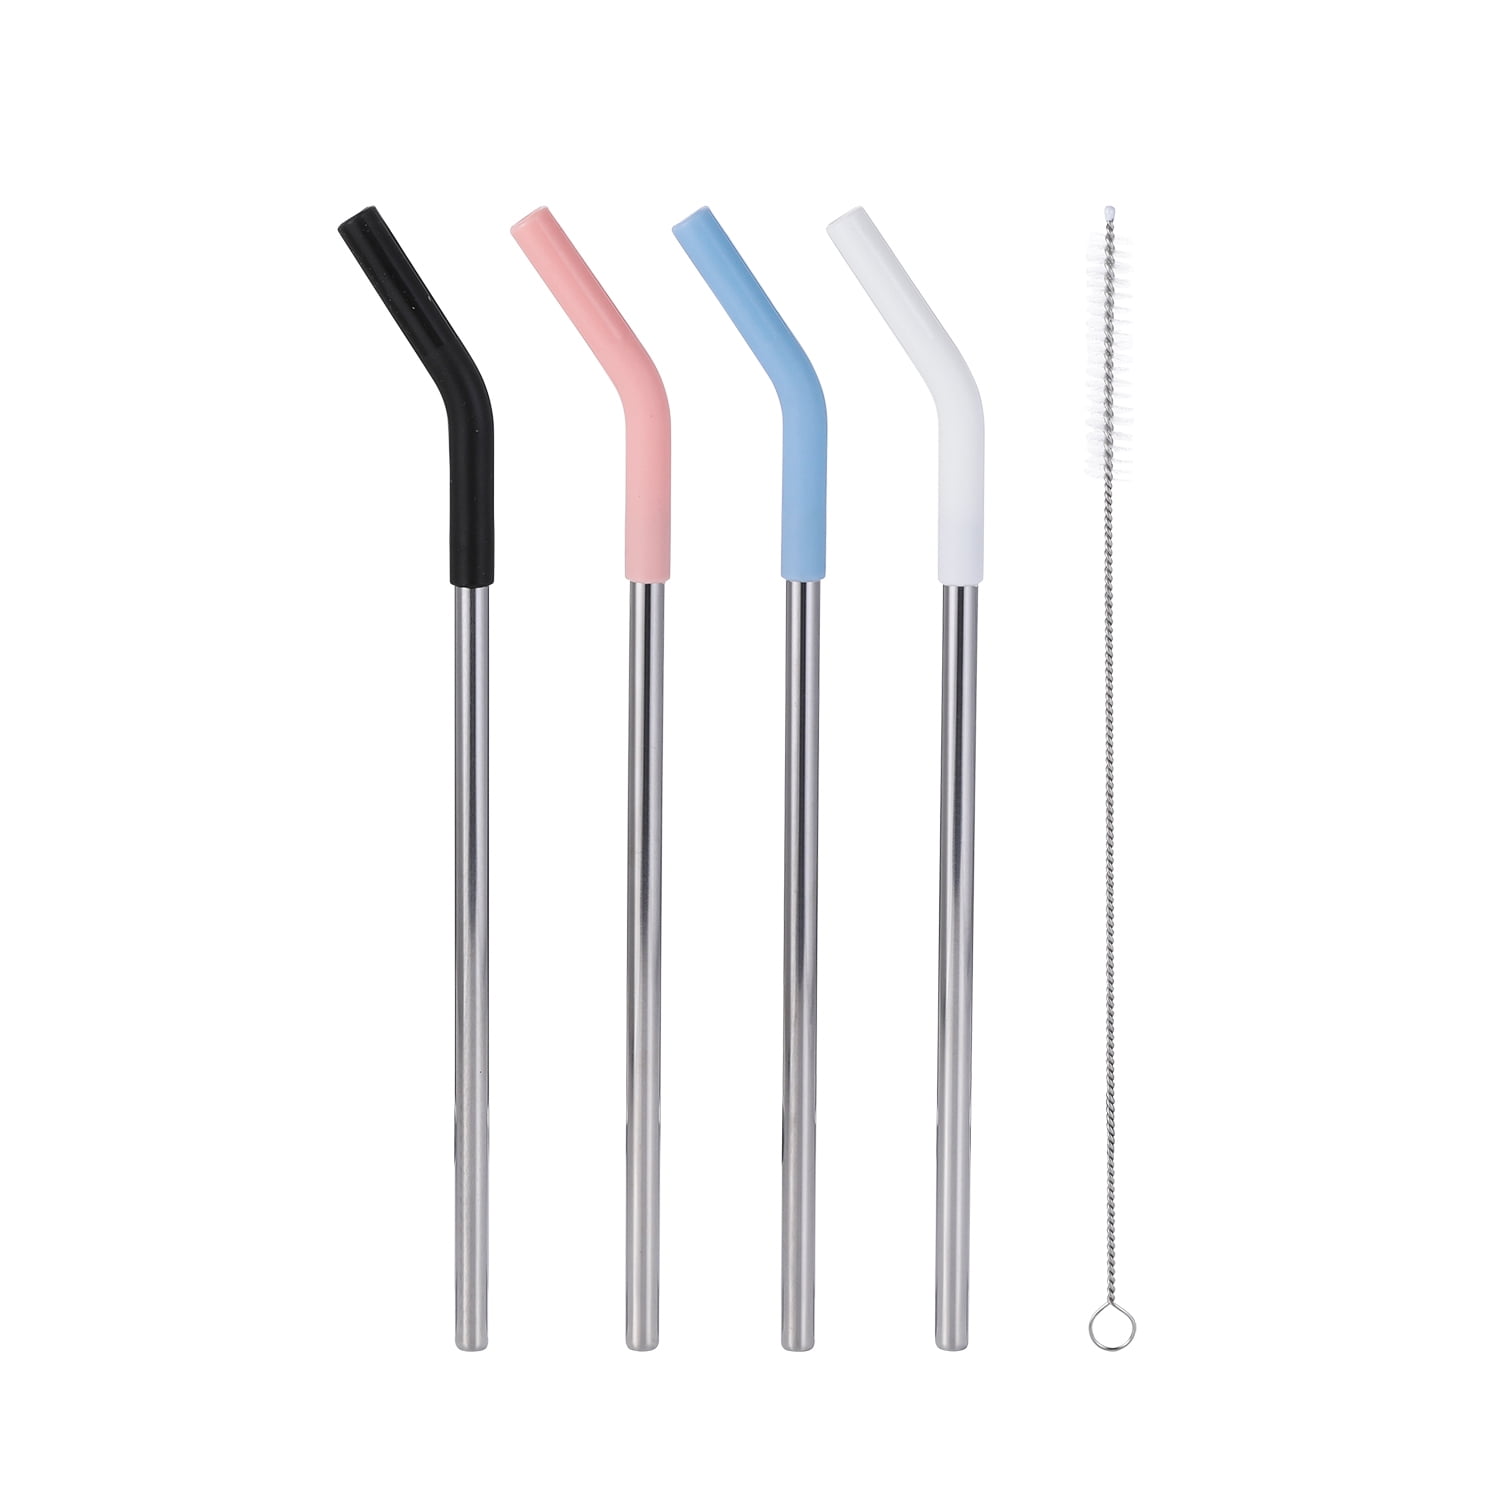 12 Pack Reusable Stainless Steel Straws,8.5 inch Long Eco Friendly Metal Drinking Straws Travel Straws for Tumblers Wine and Cold Drinks Dishwasher